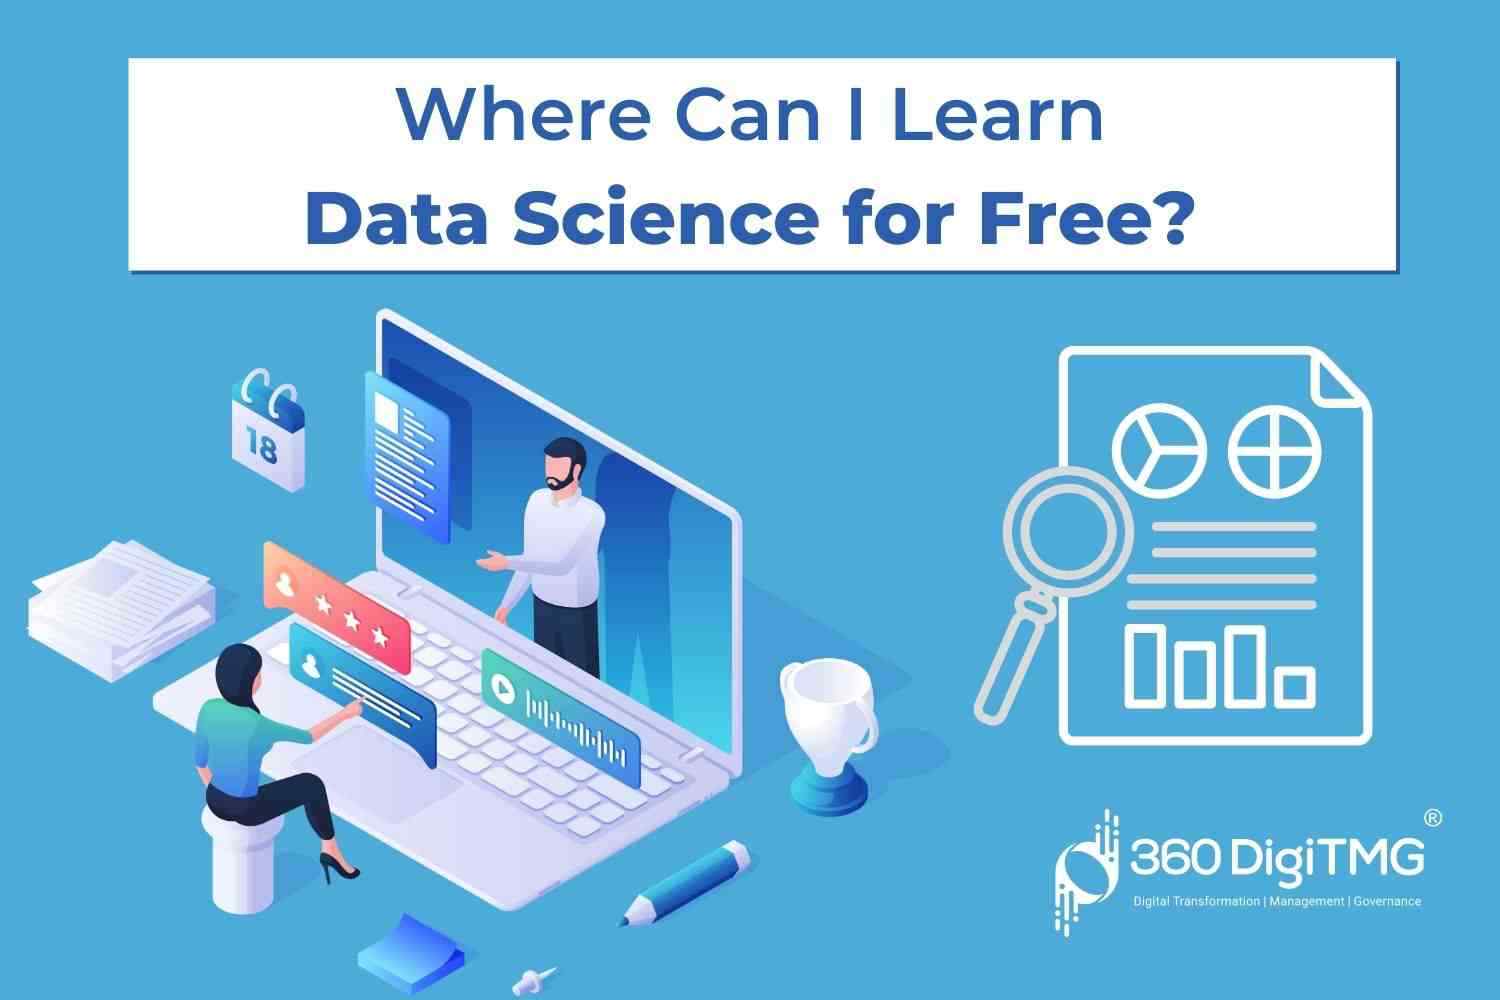 Where can I learn Data Science for free?